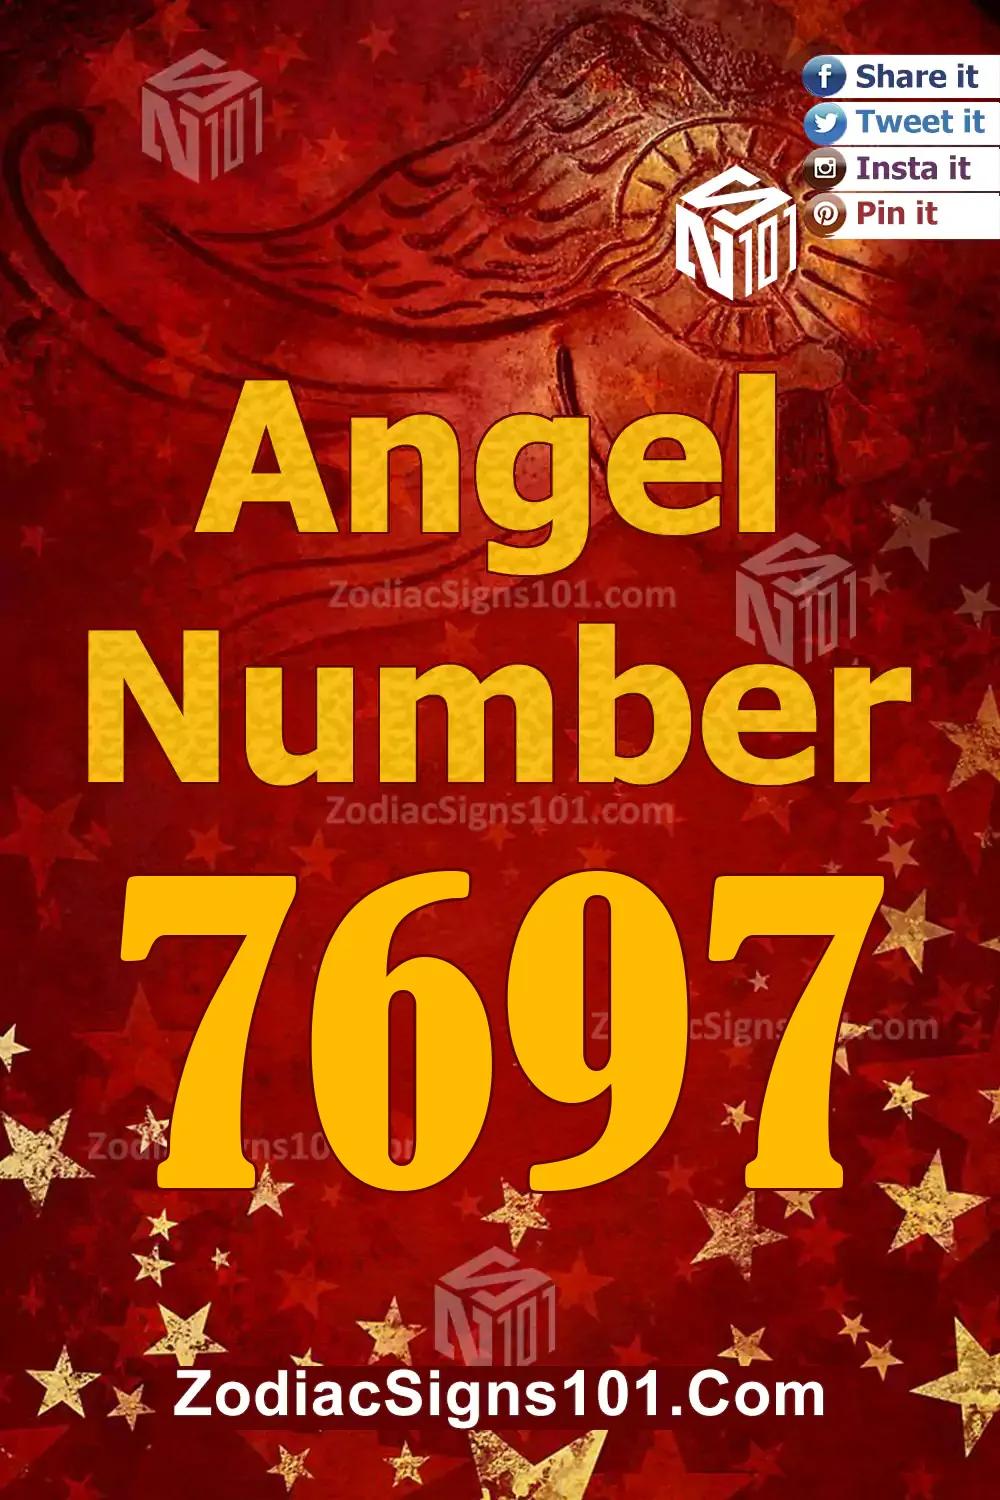 7697 Angel Number Meaning